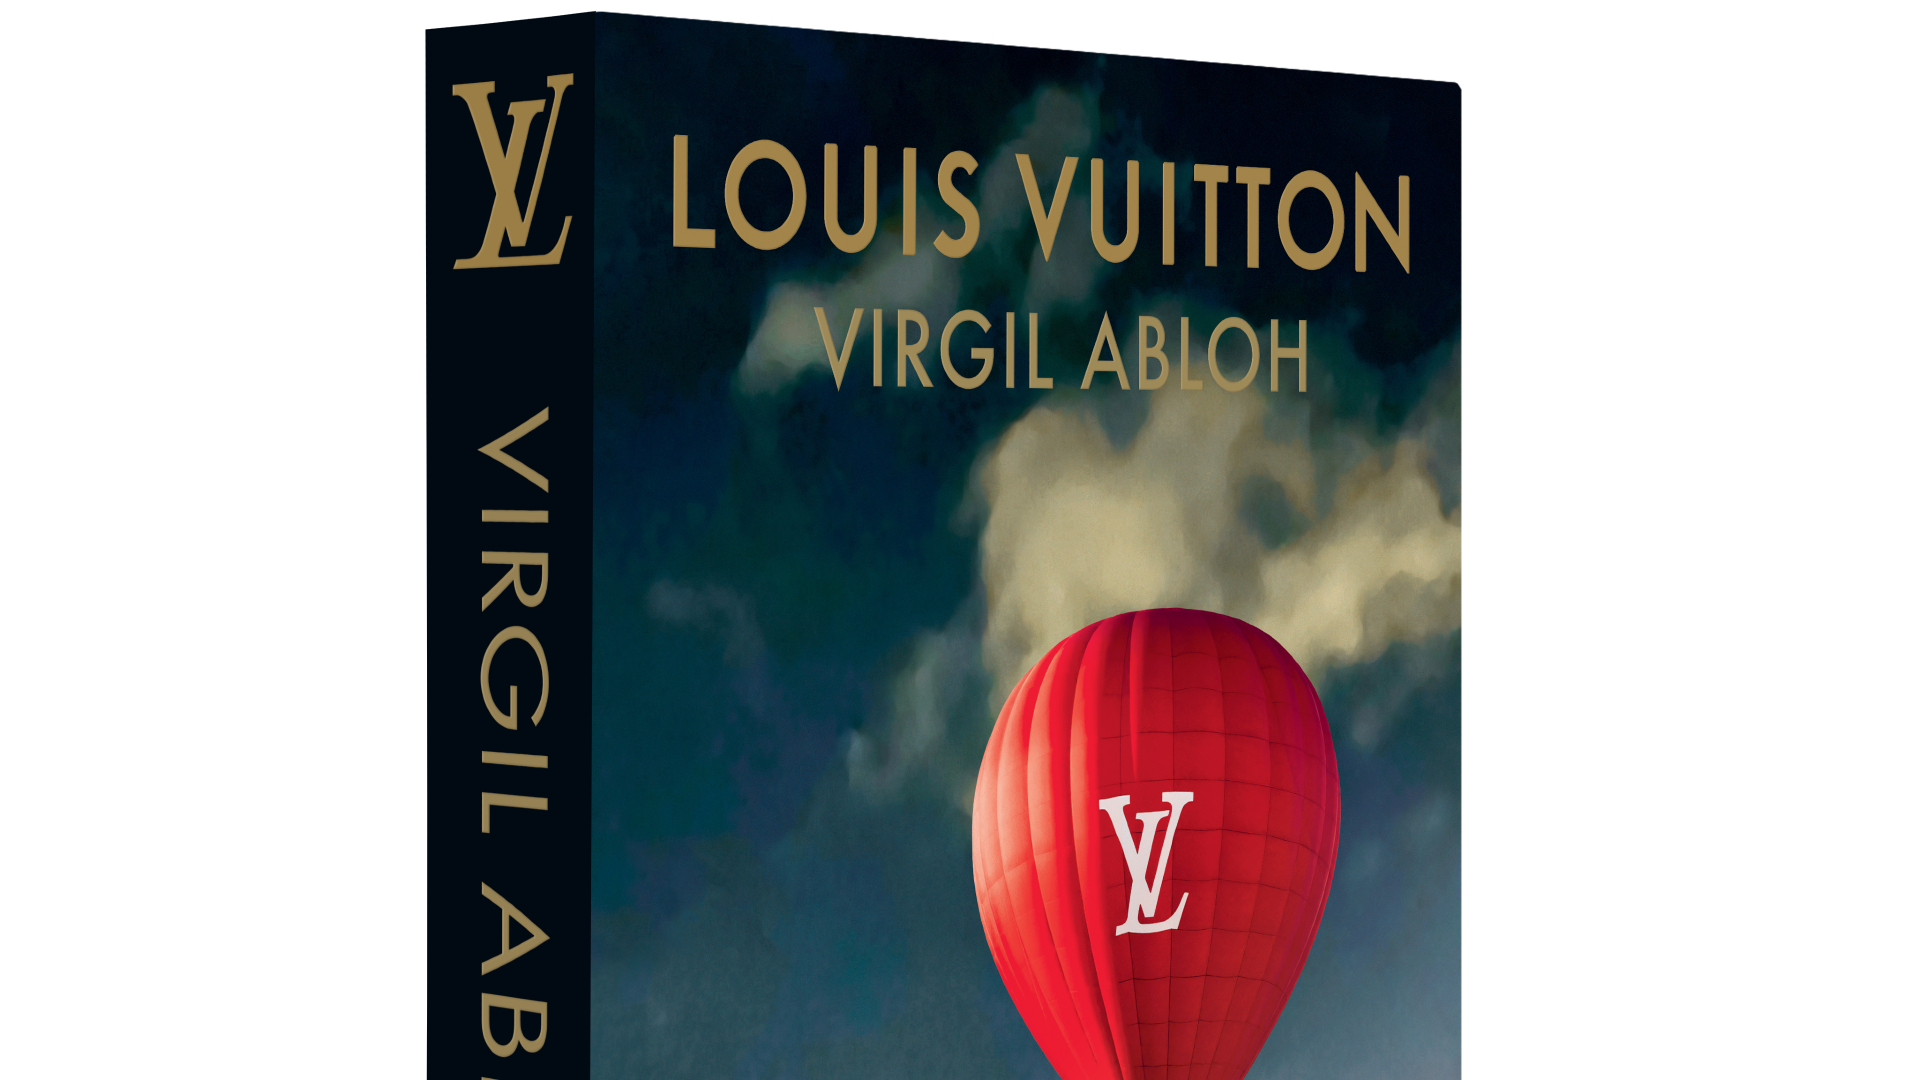 Louis Vuitton made an amazing book that needs to be in your home or office